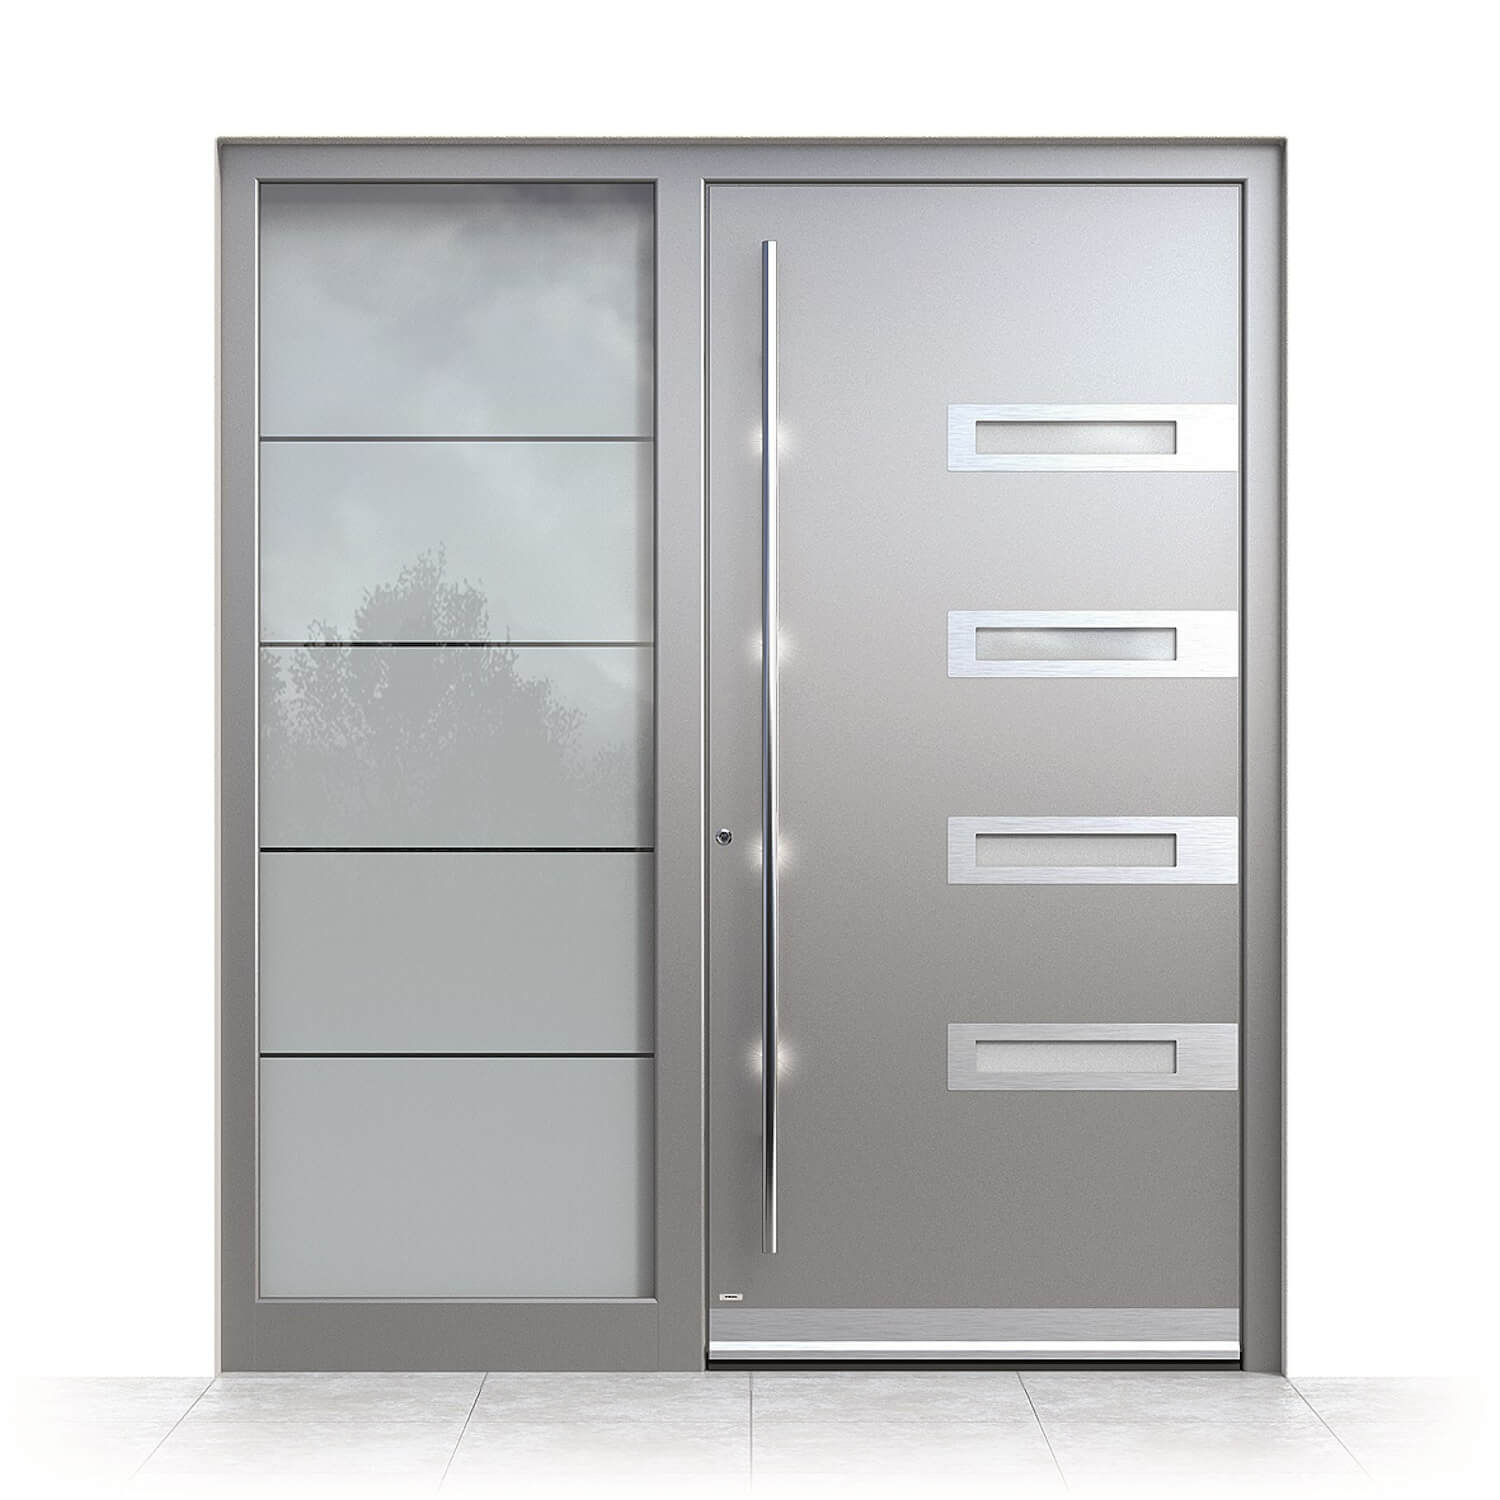 Aluminium entrance door Stockholm with side panel on the left